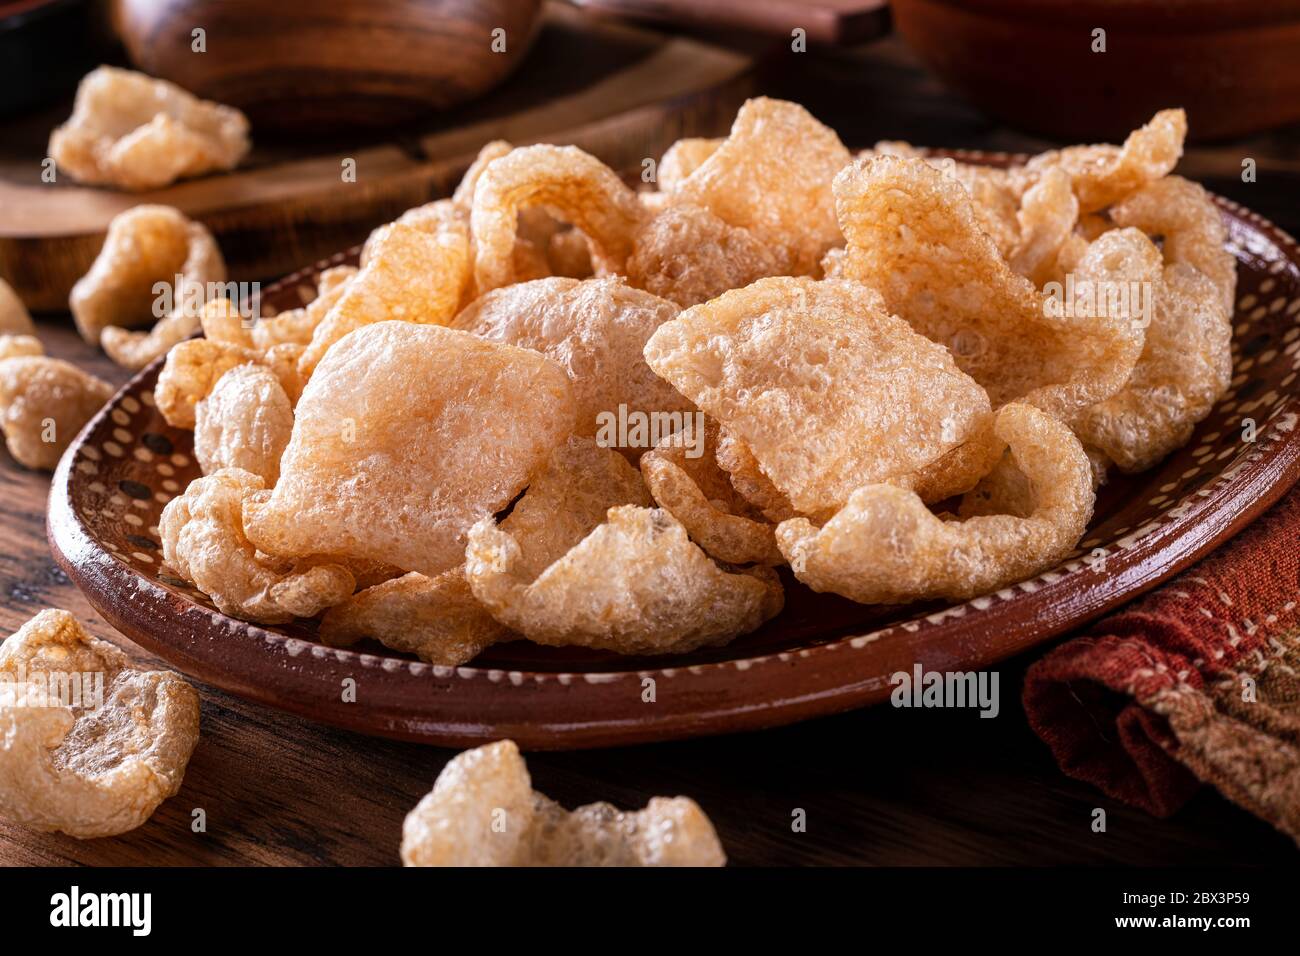 A plate of delicious deep fried pork rind chicharrones. Stock Photo